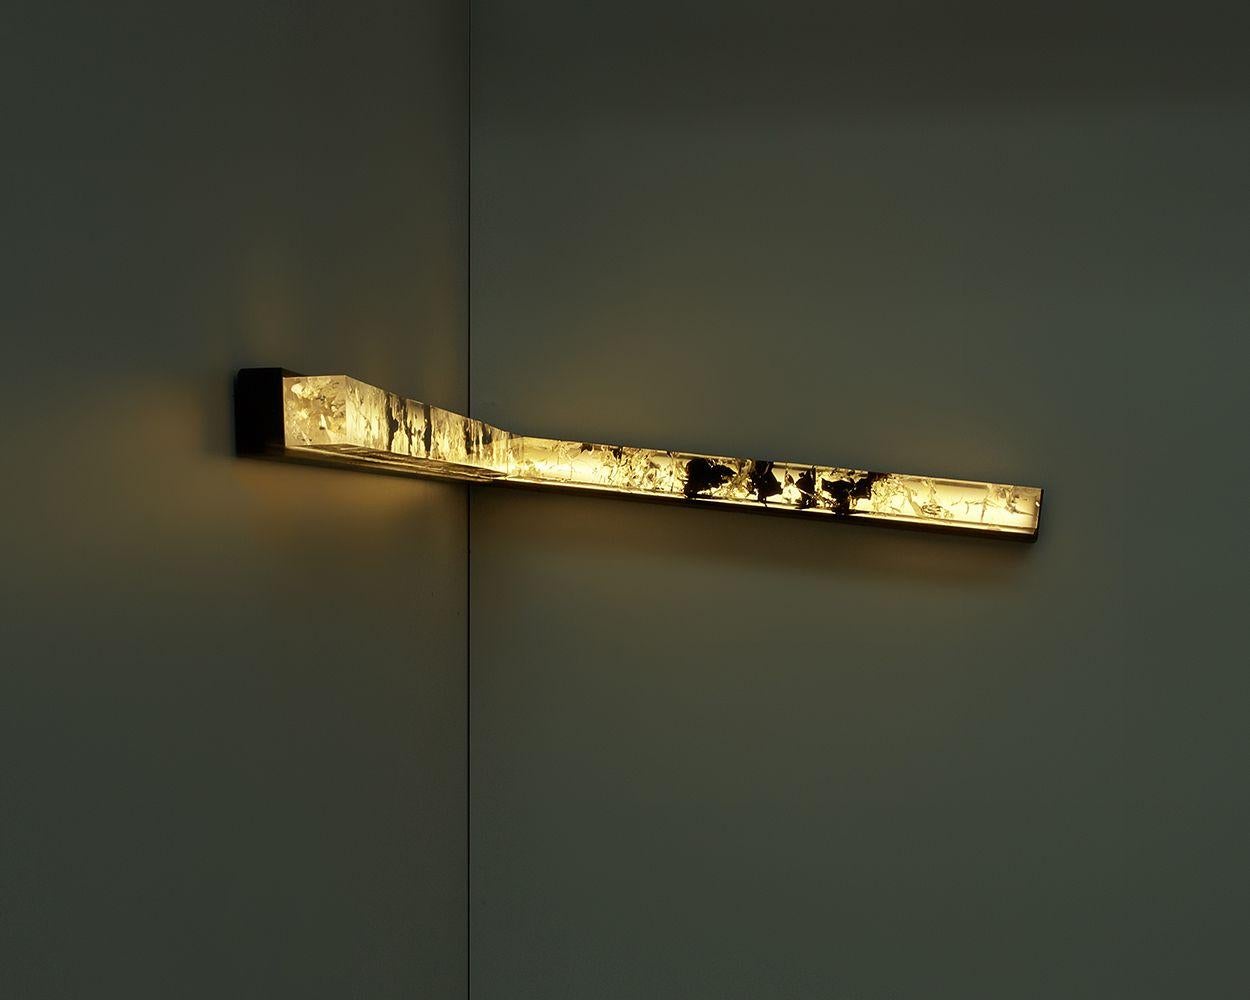 Synthesis V by Tom Price - Wall sculpture and lighting For Sale 1